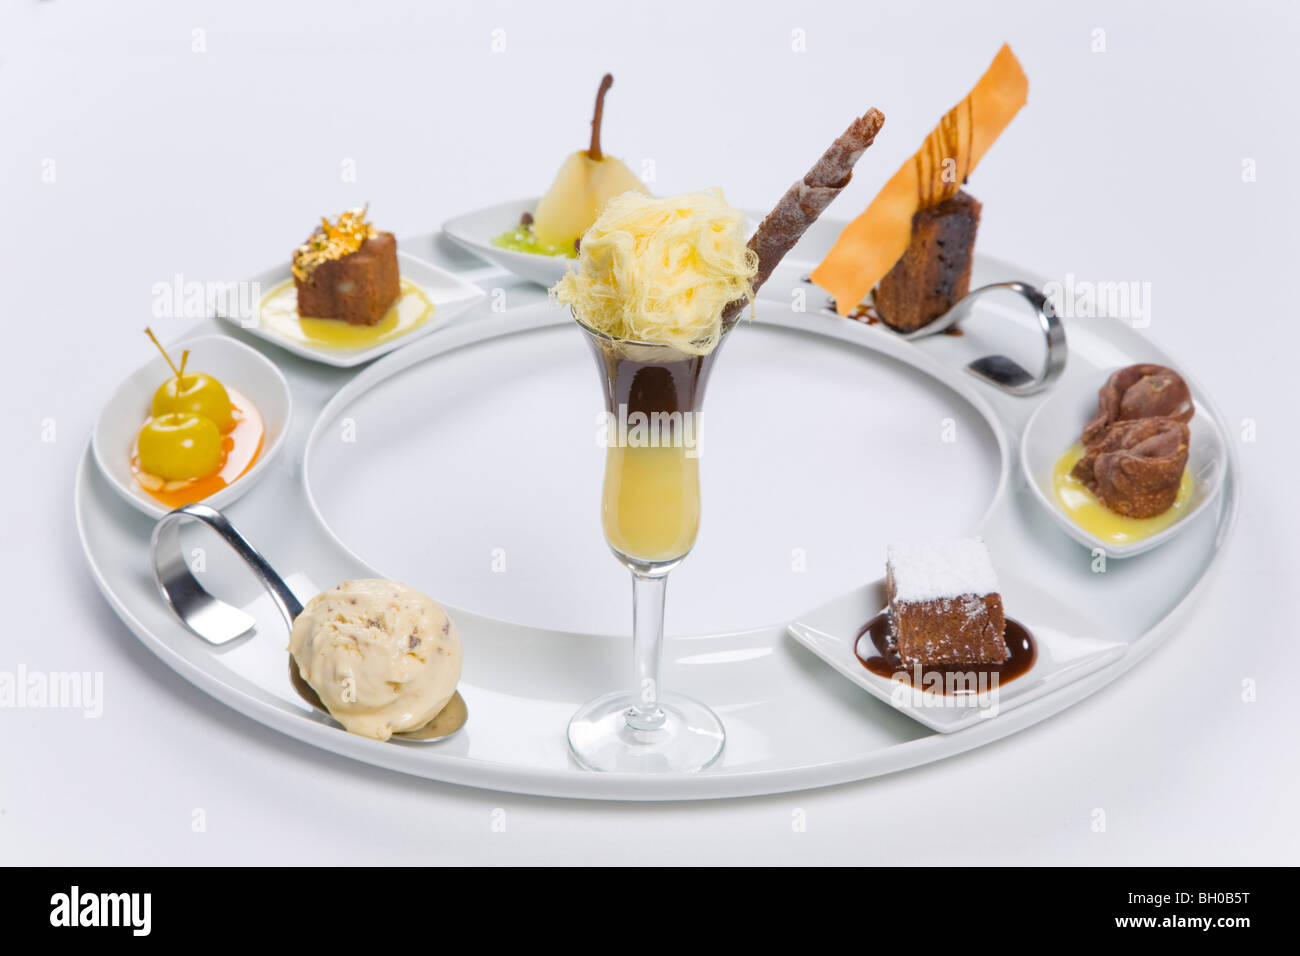 assorted desserts on circular tray Stock Photo